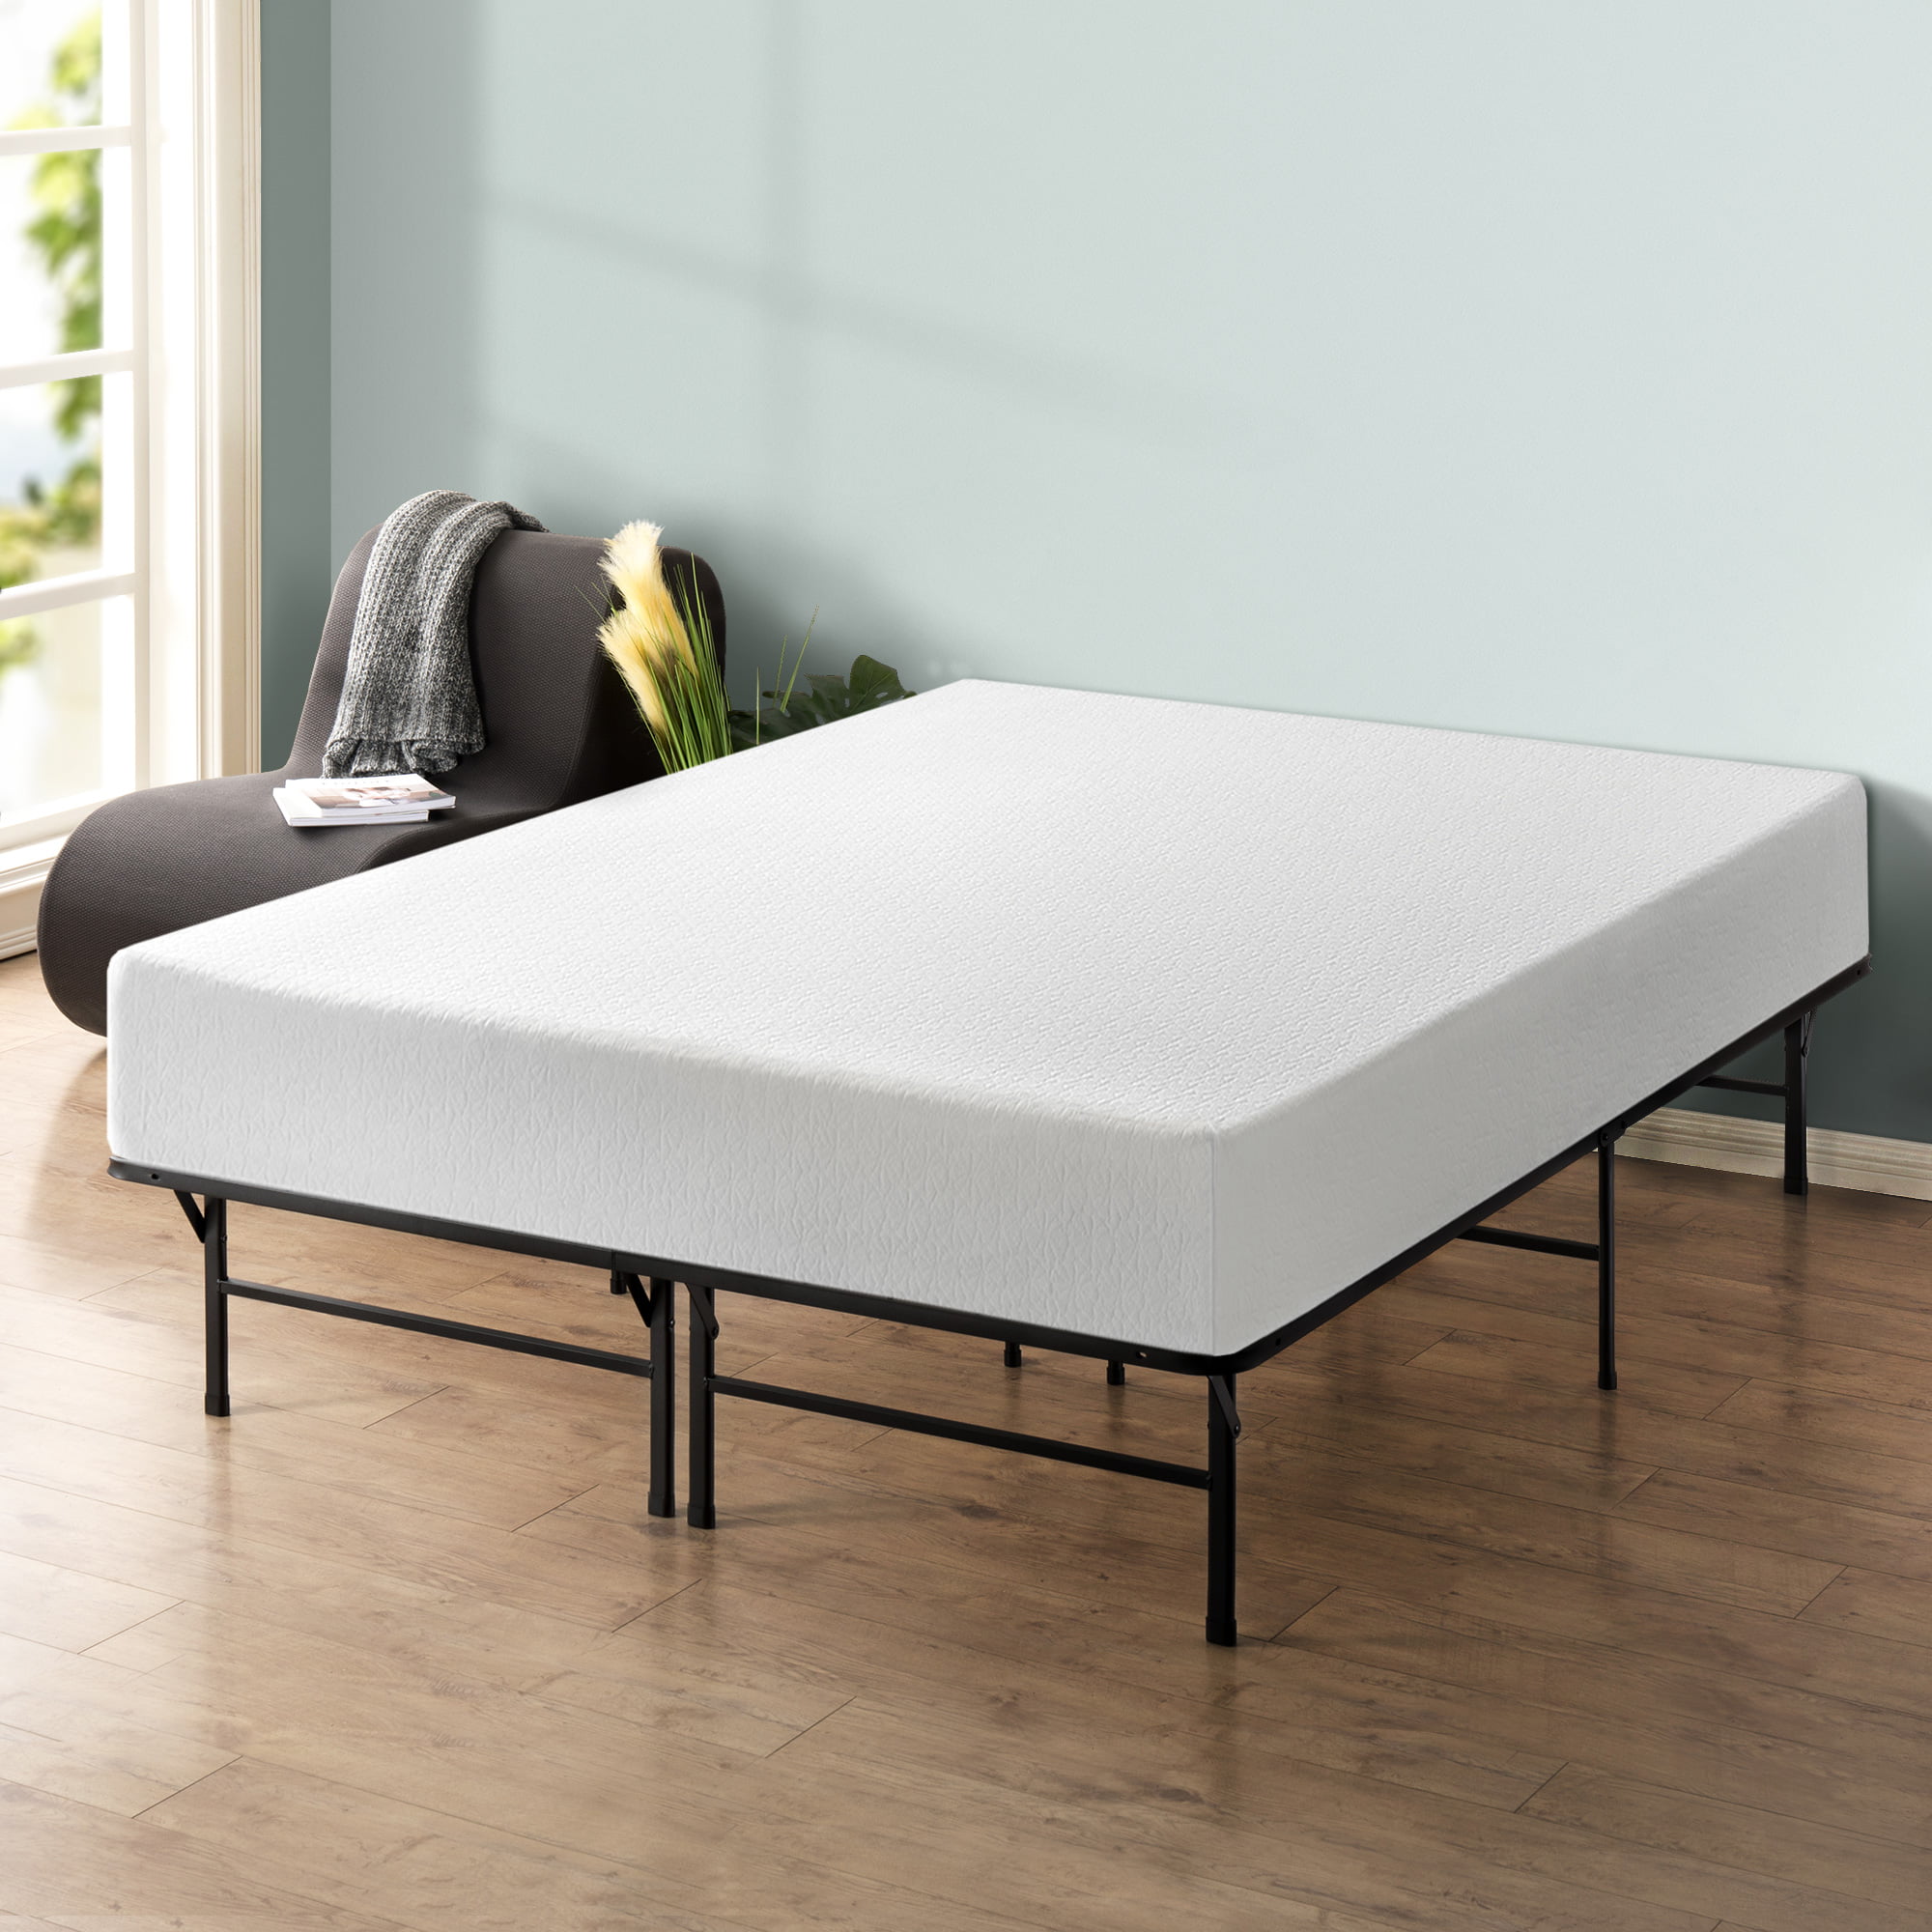 Best Price Memory Foam 12" Mattress and Dual-Use Steel Bed ...